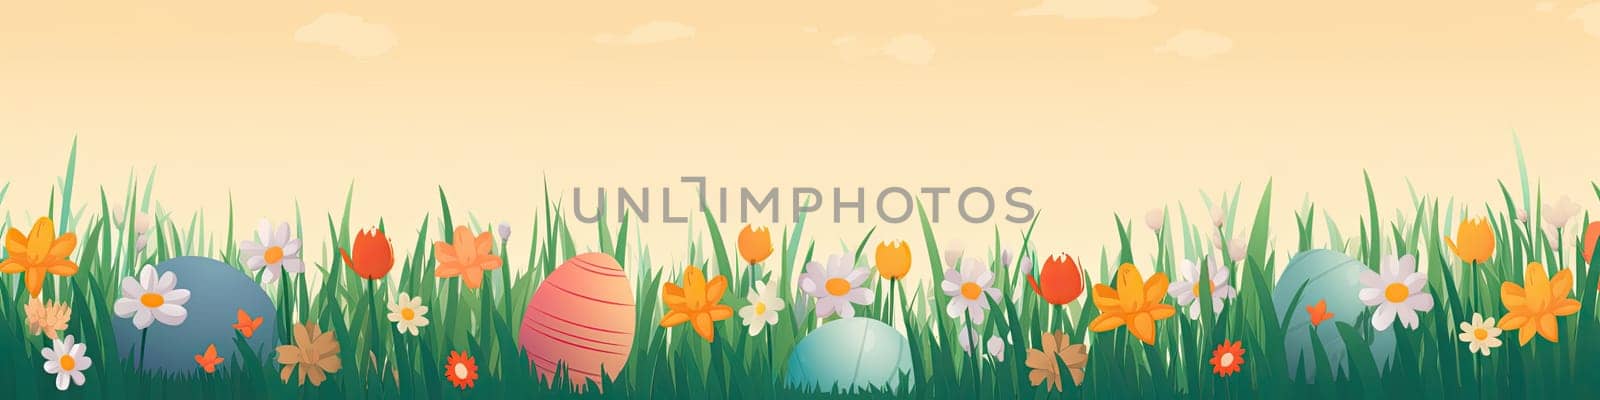 Flat cartoonish style easter banner with a colorful eggs, grass and flowers, with empty copy space by Kadula